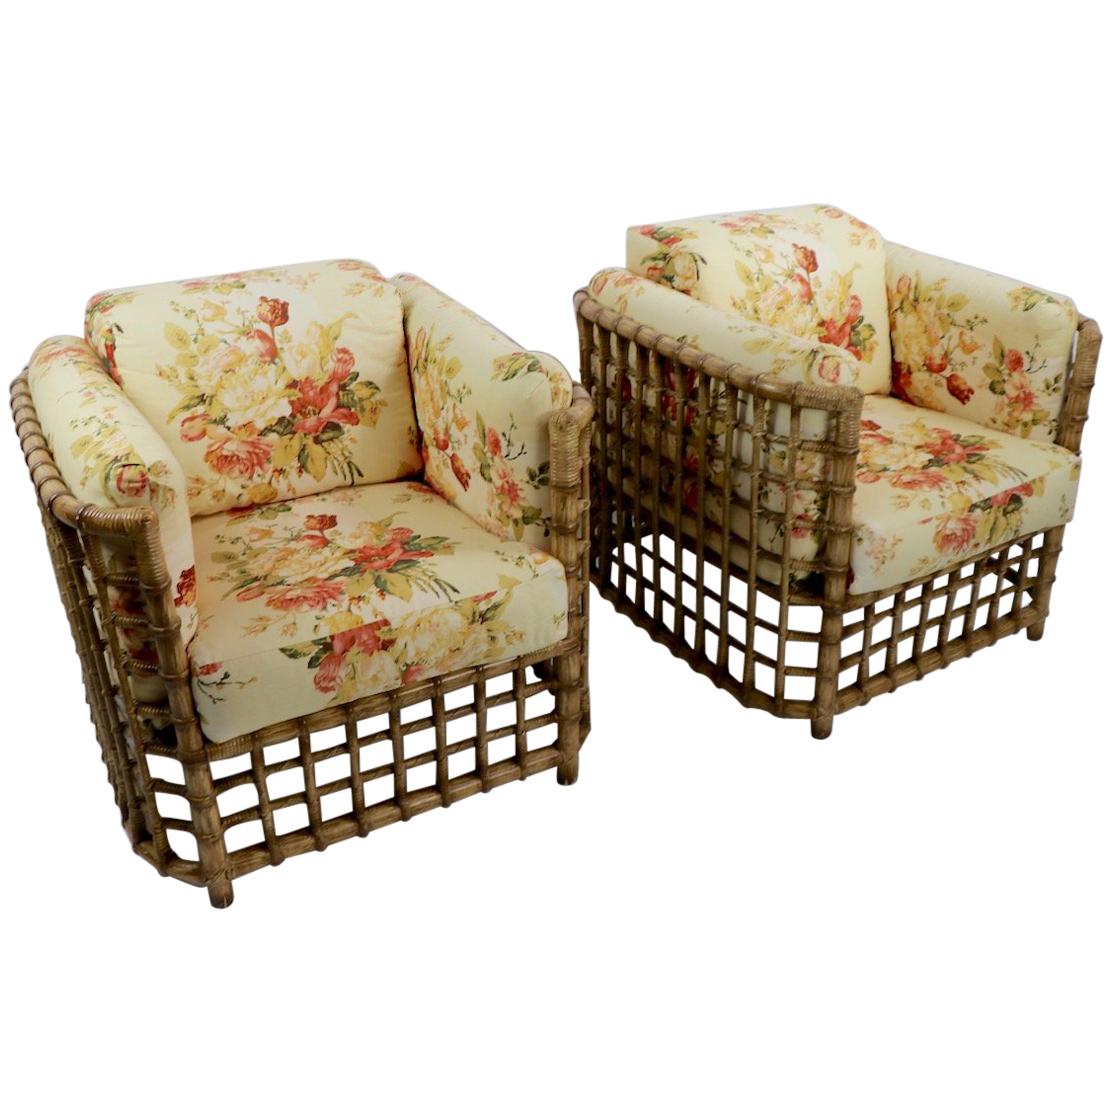 Suite of Willow Reed Bamboo Chairs and Ottoman by Henry Olko